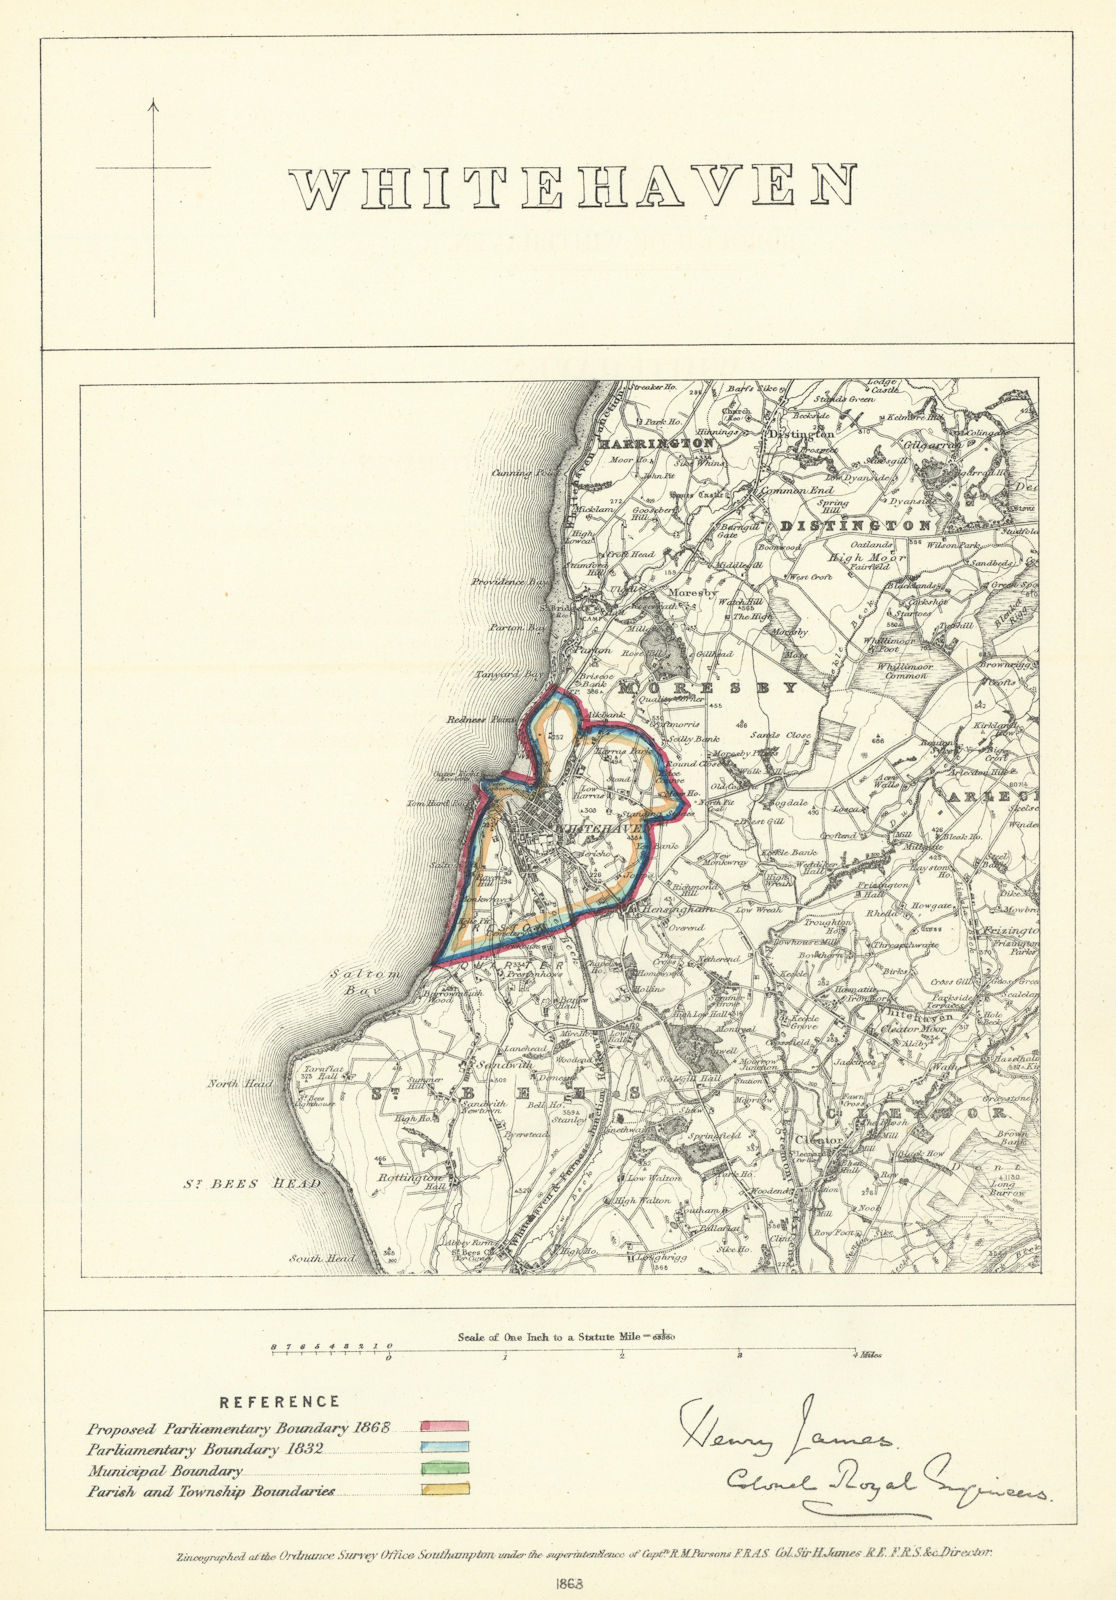 Whitehaven, Cumbria. JAMES. Parliamentary Boundary Commission 1868 old map